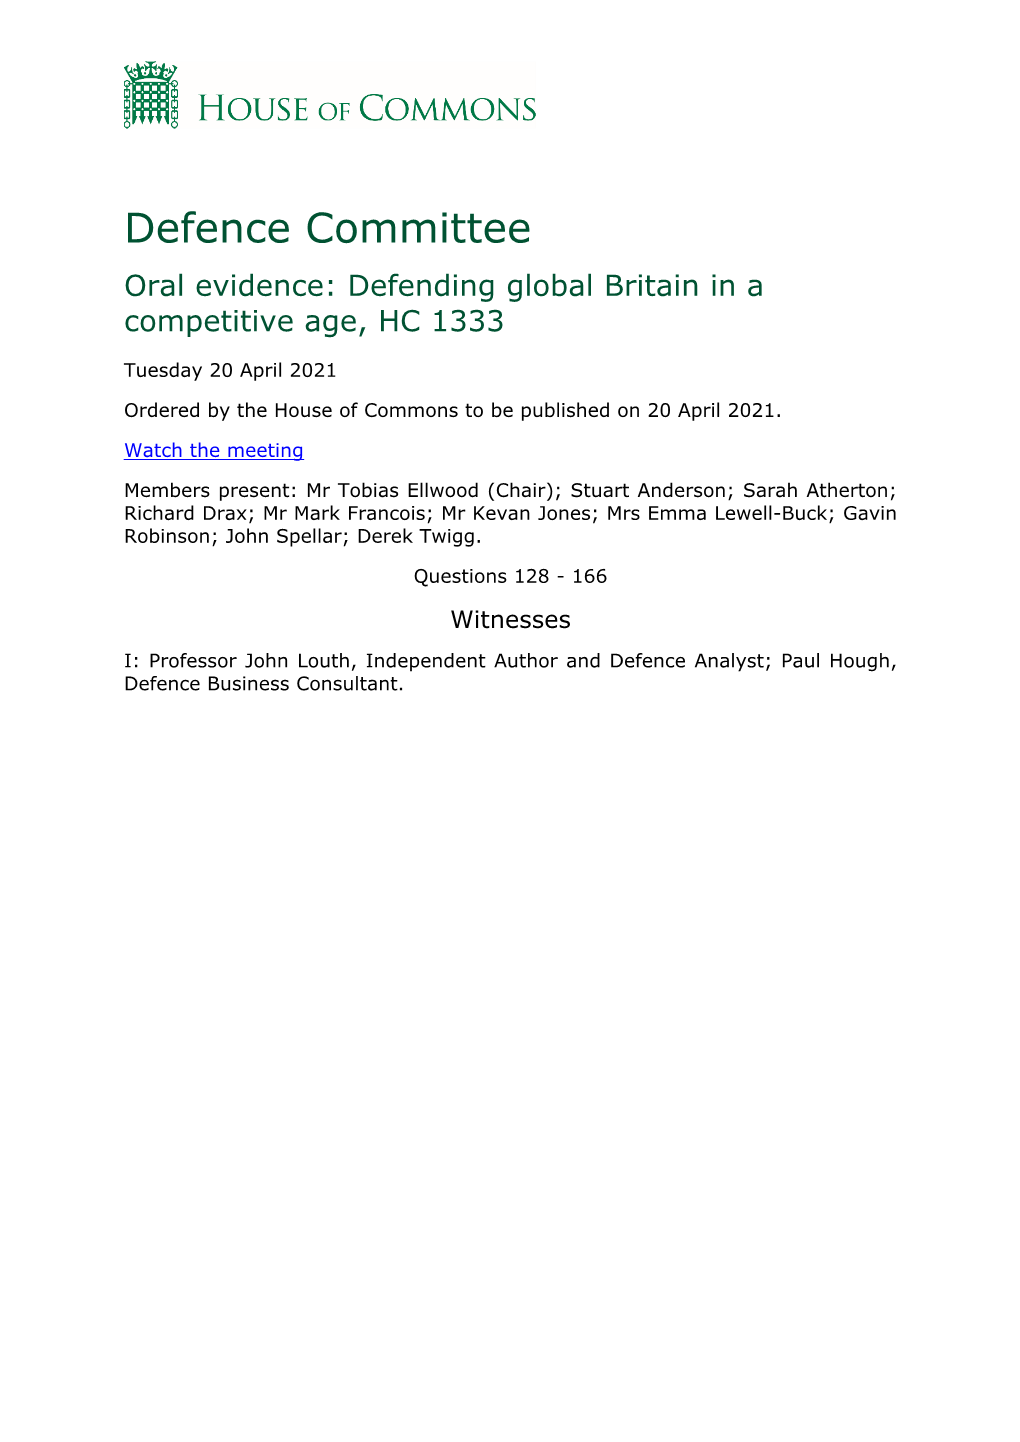 Defence Committee Oral Evidence: Defending Global Britain in a Competitive Age, HC 1333